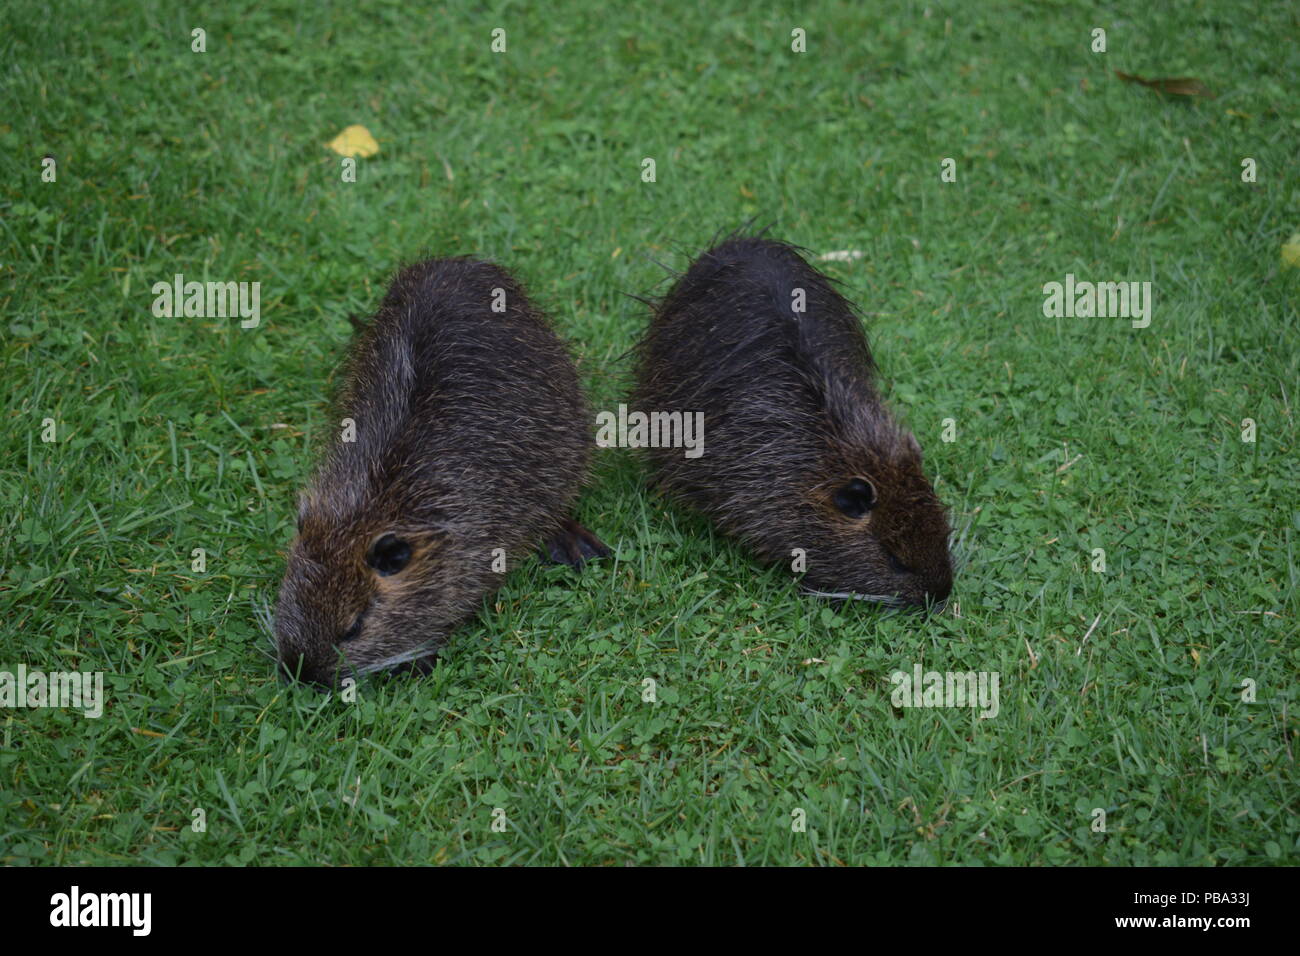 Two coypus on grass Stock Photo